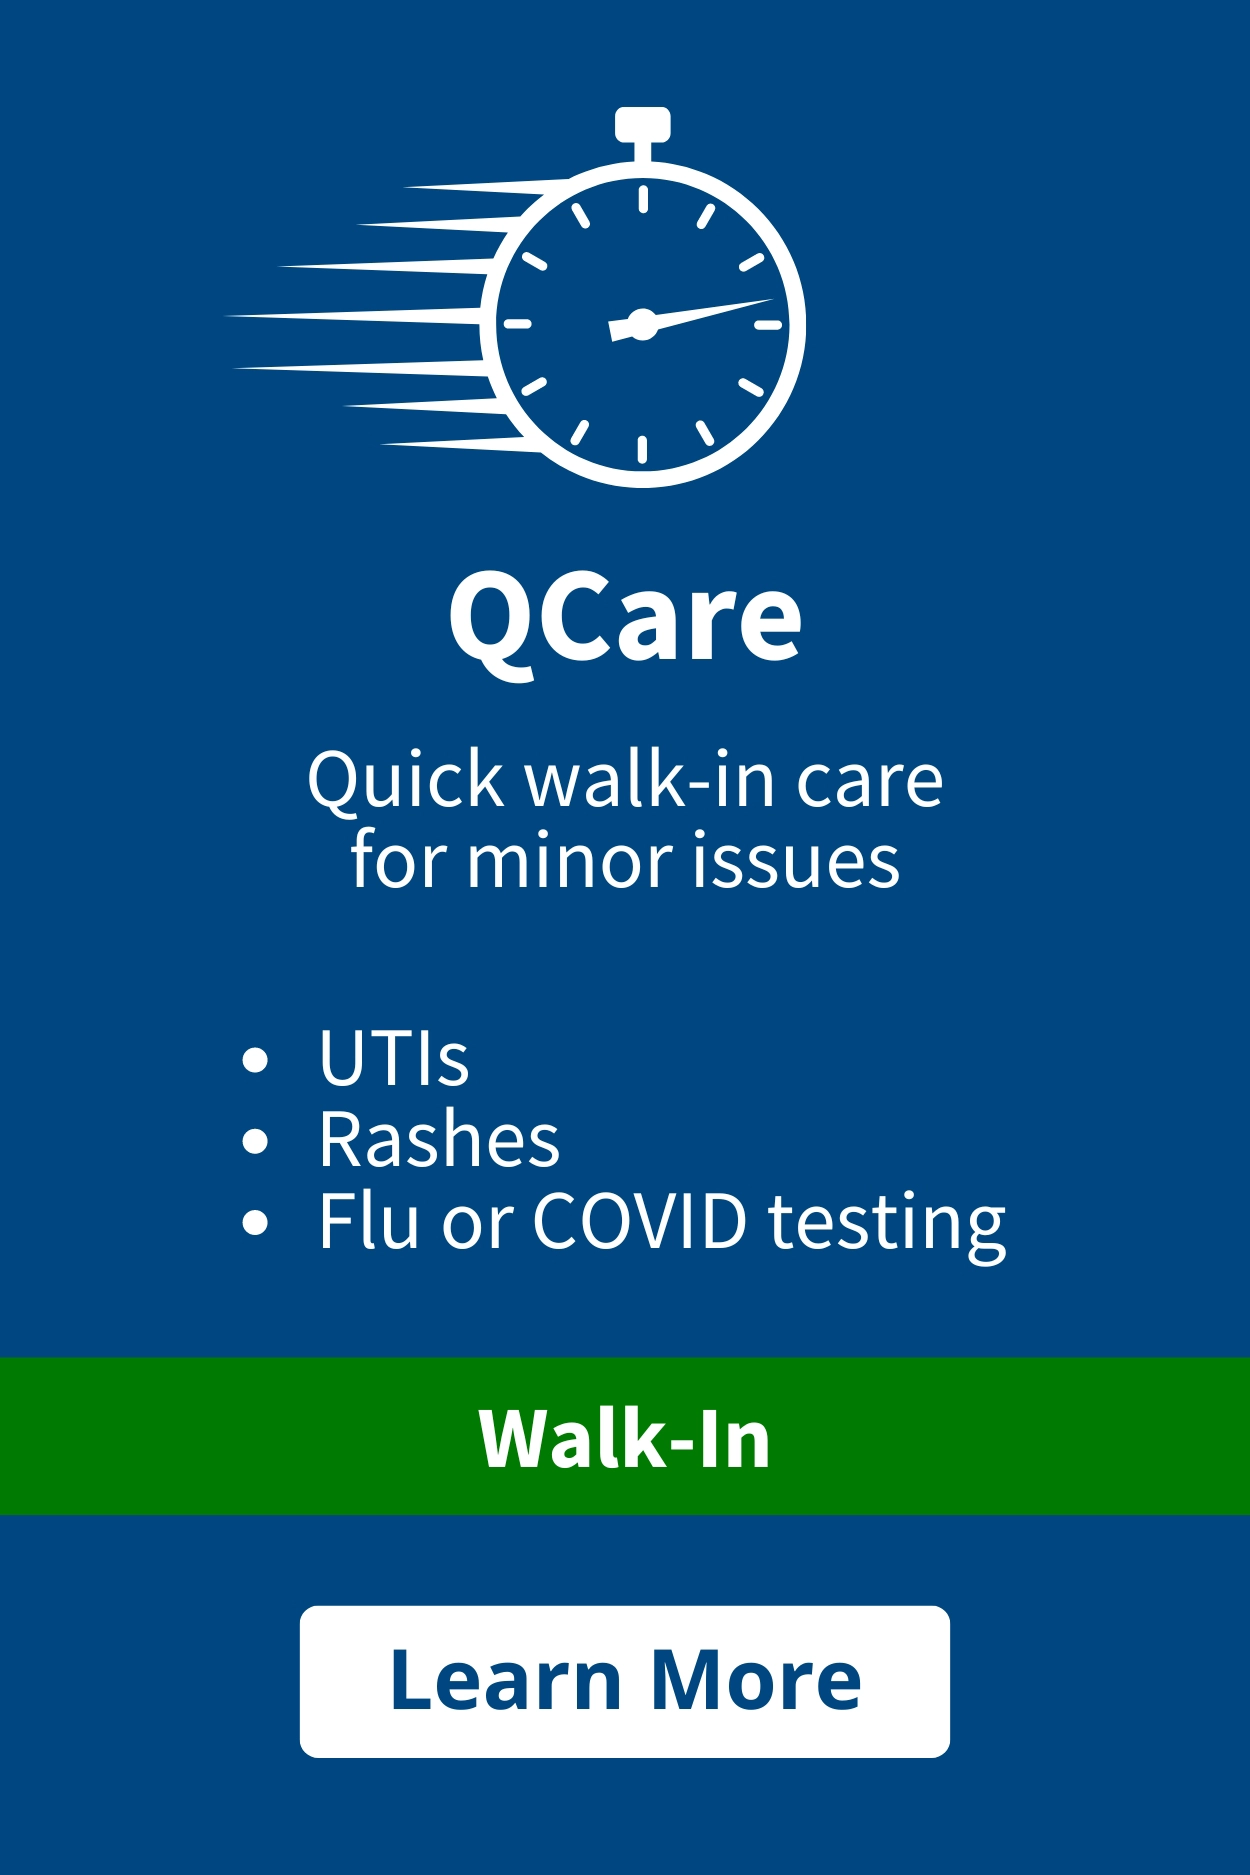 Blue graphic with text reading "QCare. Quick walk-in care for minor issues." Bullet points read: "UTIs, Rashes, Flu or COVID testing." Light blue bar reads "Walk-In." Button reads "Learn More"